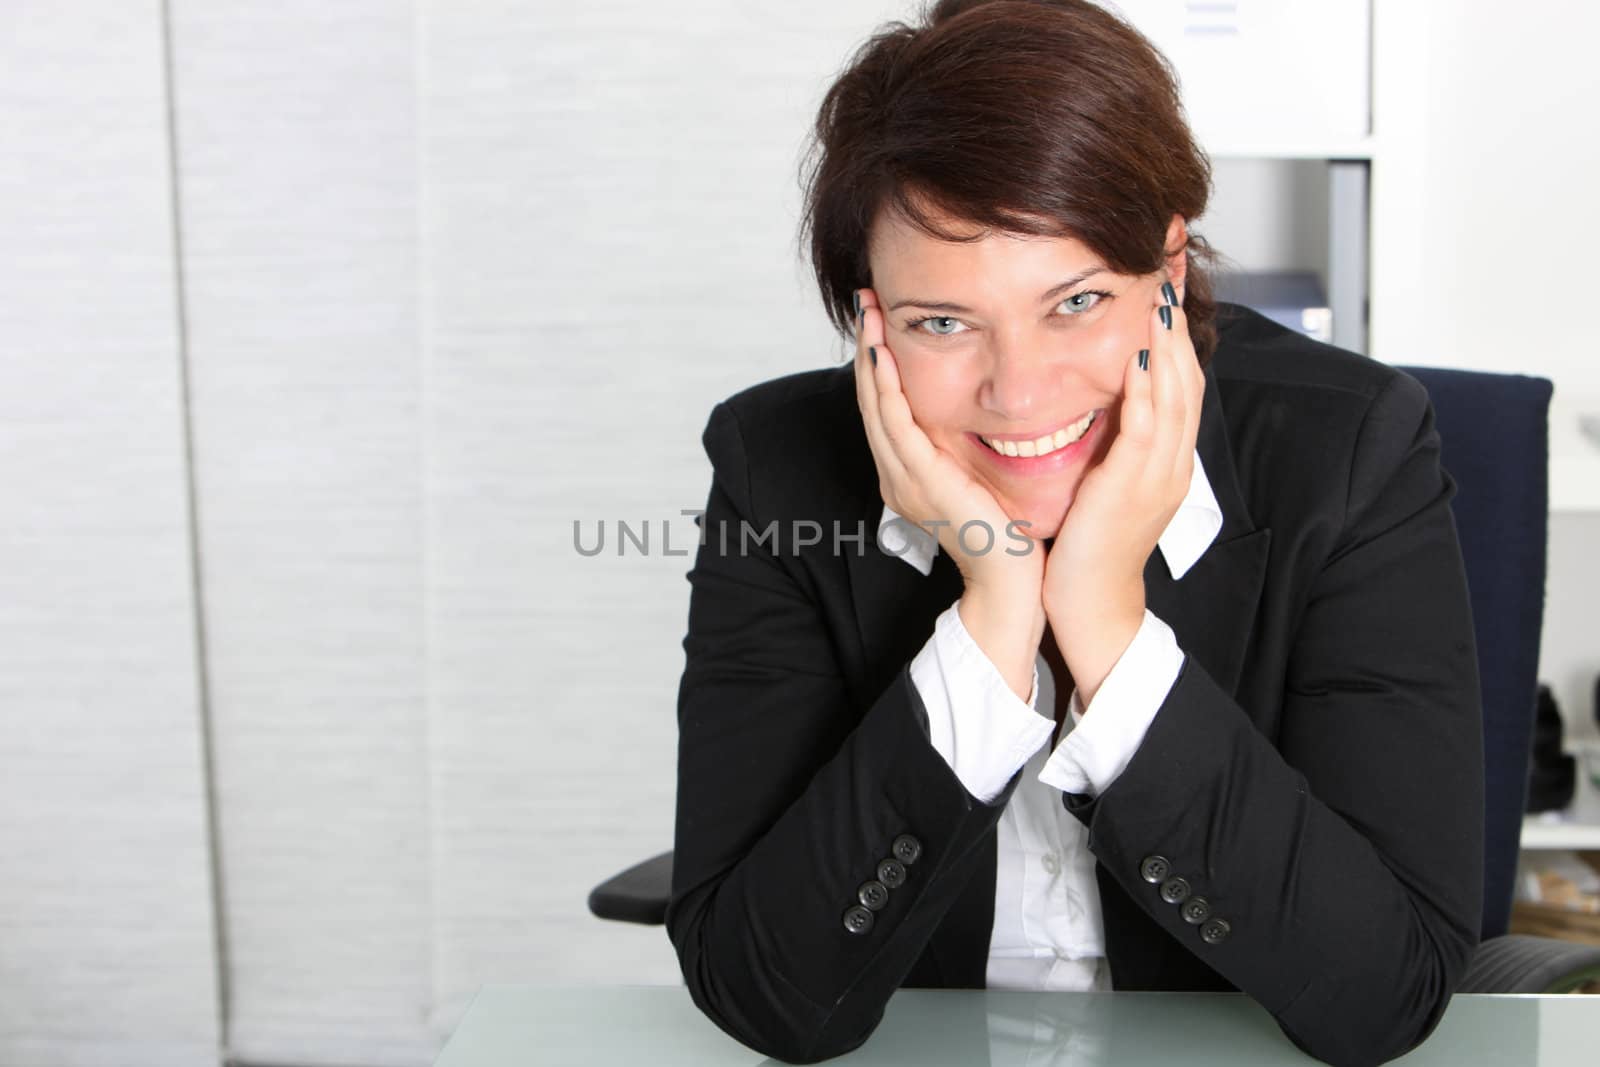 Smiling business professional at her desk by Farina6000